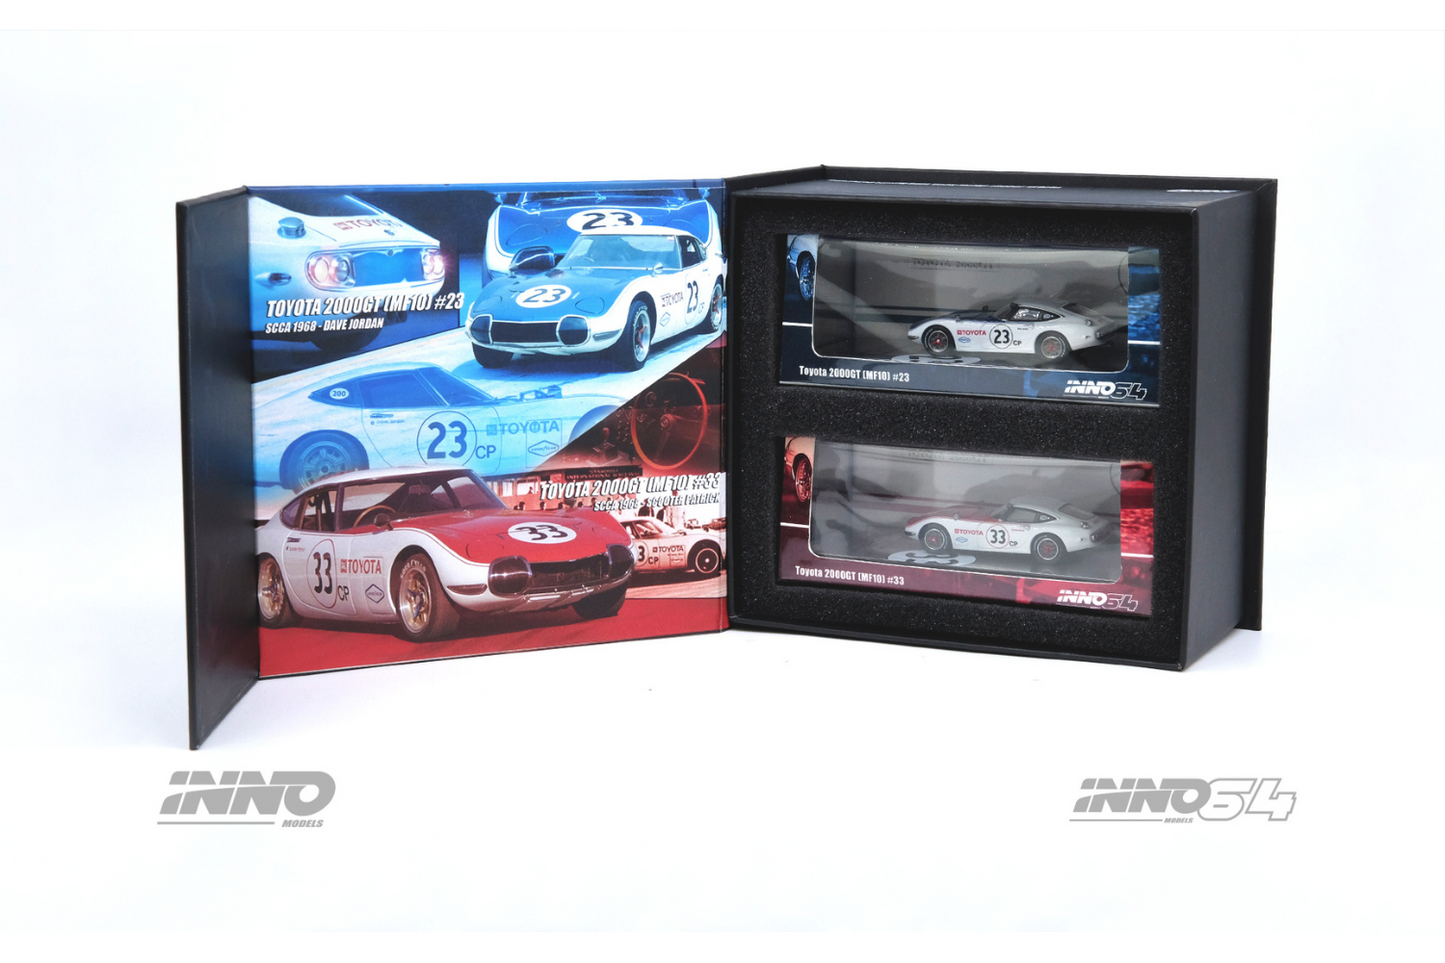 Inno64 Toyota 2000GT #23 & #33 SCCA 1968 Box Set Collection